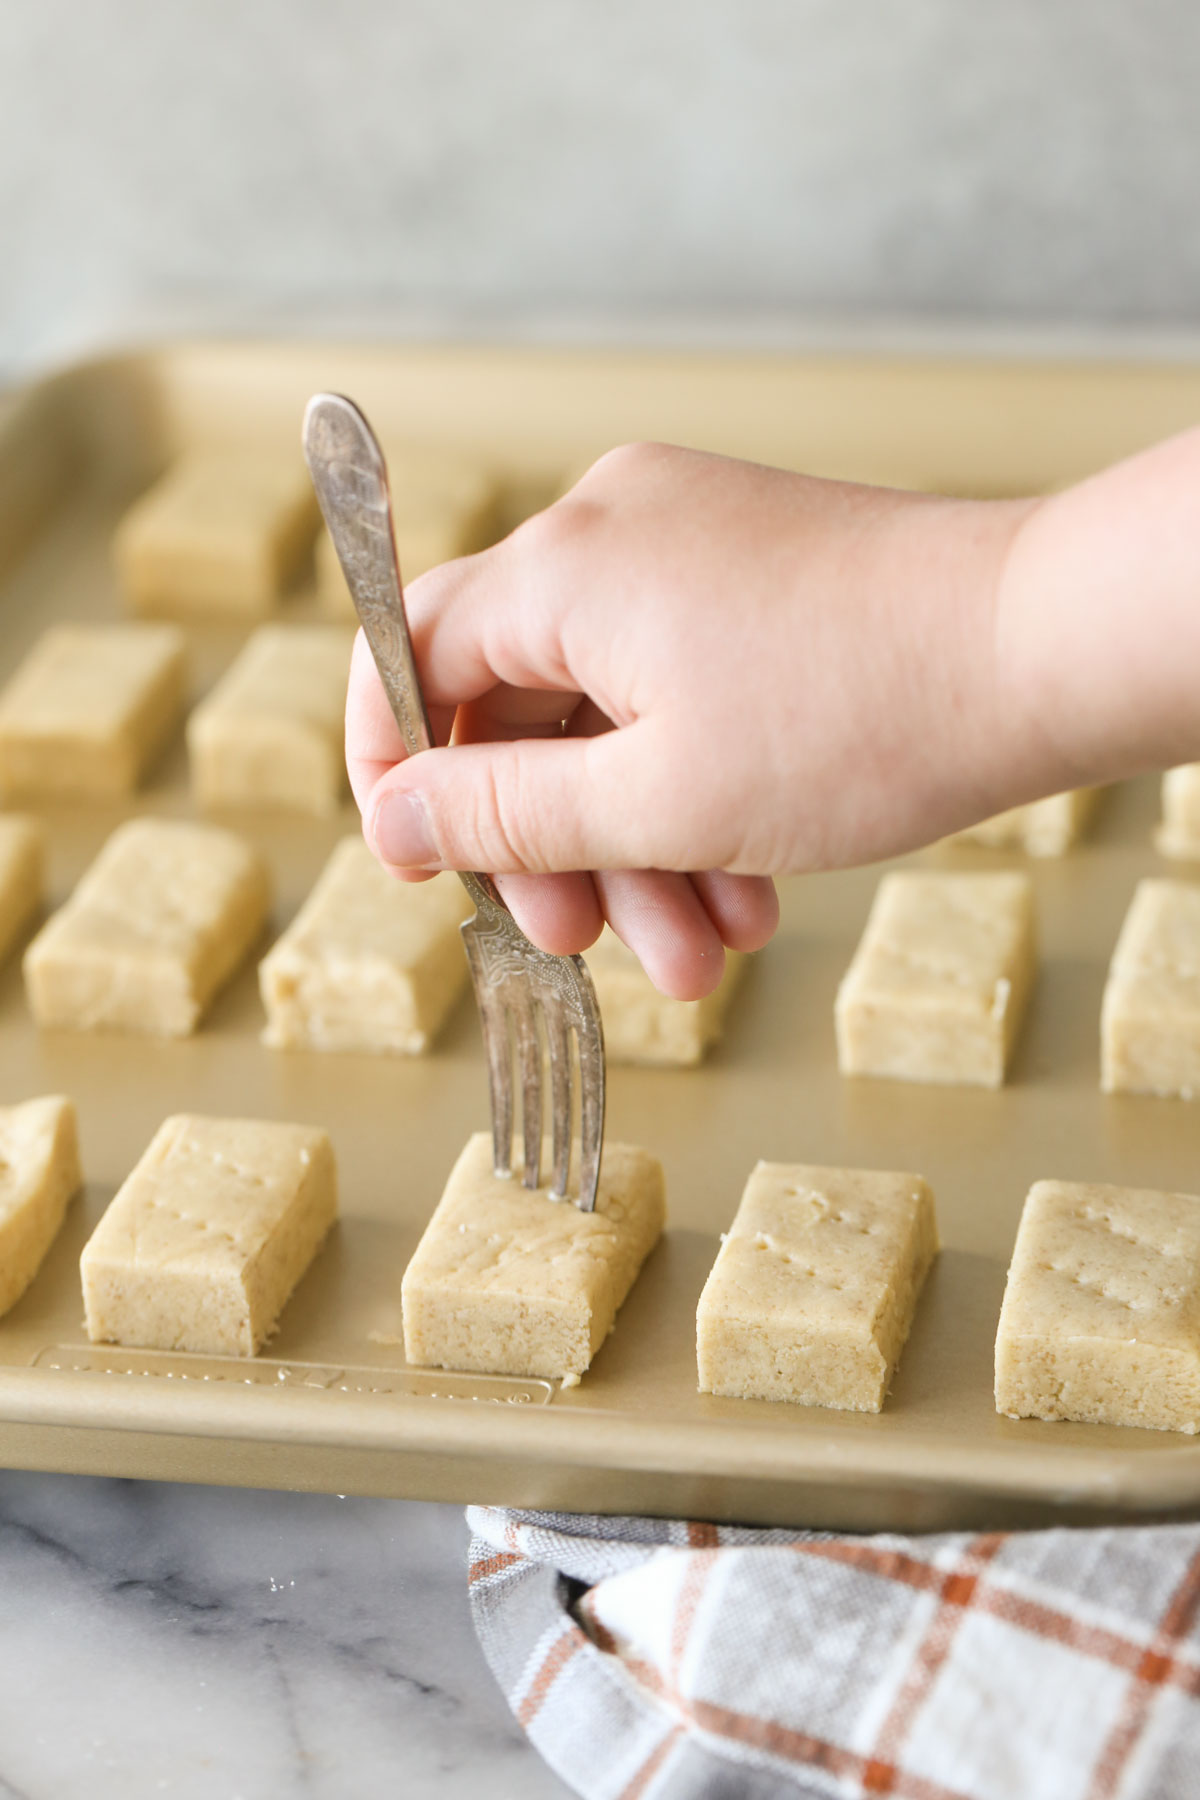 Buttery Shortbread Cookie dough rectangles arranged on a baking sheet, with a hand using a fork to poke the top of the dough.  